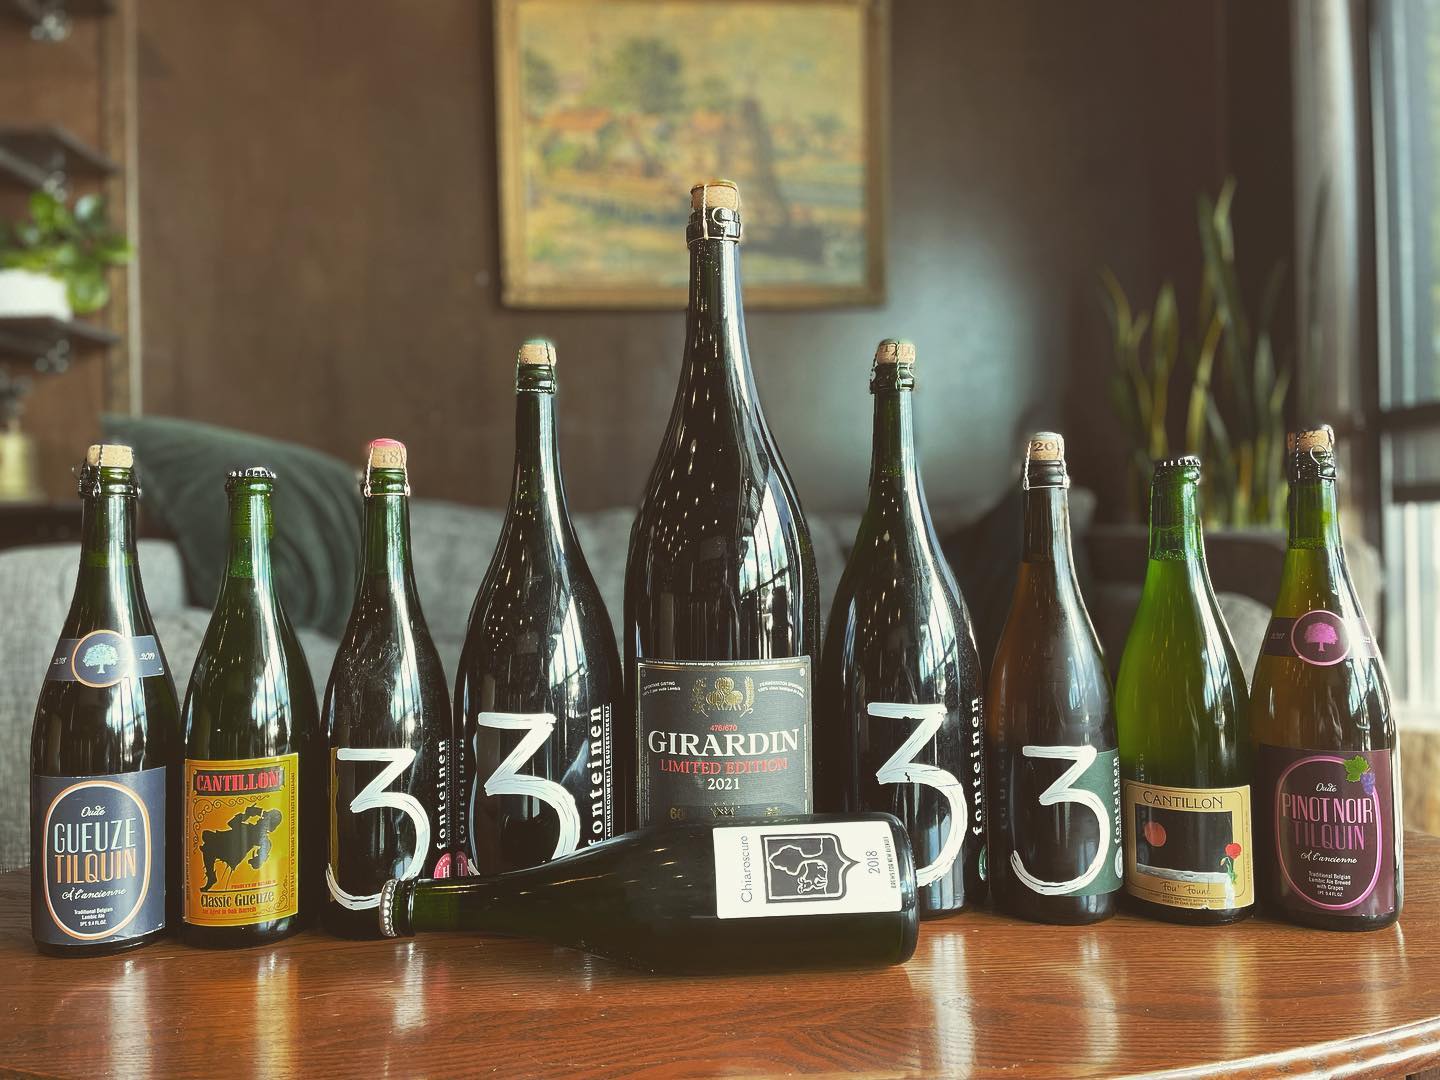 Here’s a glimpse into a few of the lambic beers we will be pouring at our screening of @bottleconditionedfilm on Sunday 5/21. Ticket link in bio. 
We have adjusted to one screening at 3pm to allow for additional hang time and beers into the evening. We will re-open our doors for normal service at 5:30. 
Proceeds from all Bokke pours will go towards supporting Brews For New Avenues and all the incredible things they are doing to support our youth. 
If you haven’t gotten a ticket yet, make sure to jump on it, only a few left. 
@_bokke_ 
@3fonteinen 
#brouwerijgirardin 
@brasseriecantillonofficiel 
@gueuzetilquin 
@brews4newaves 
.
.
.
.
#wildwoodtaphouse #wildwoodtap #bottleconditioned #bottleconditionedfilm #lambicbeer #lambic #lambicfilm #portlandfilm #portlandfilmscreening #thingstodoinportland #pdx #pdxbeer #pnw #pnwbeer #hillsboro #hillsborooregon #twoisaparty